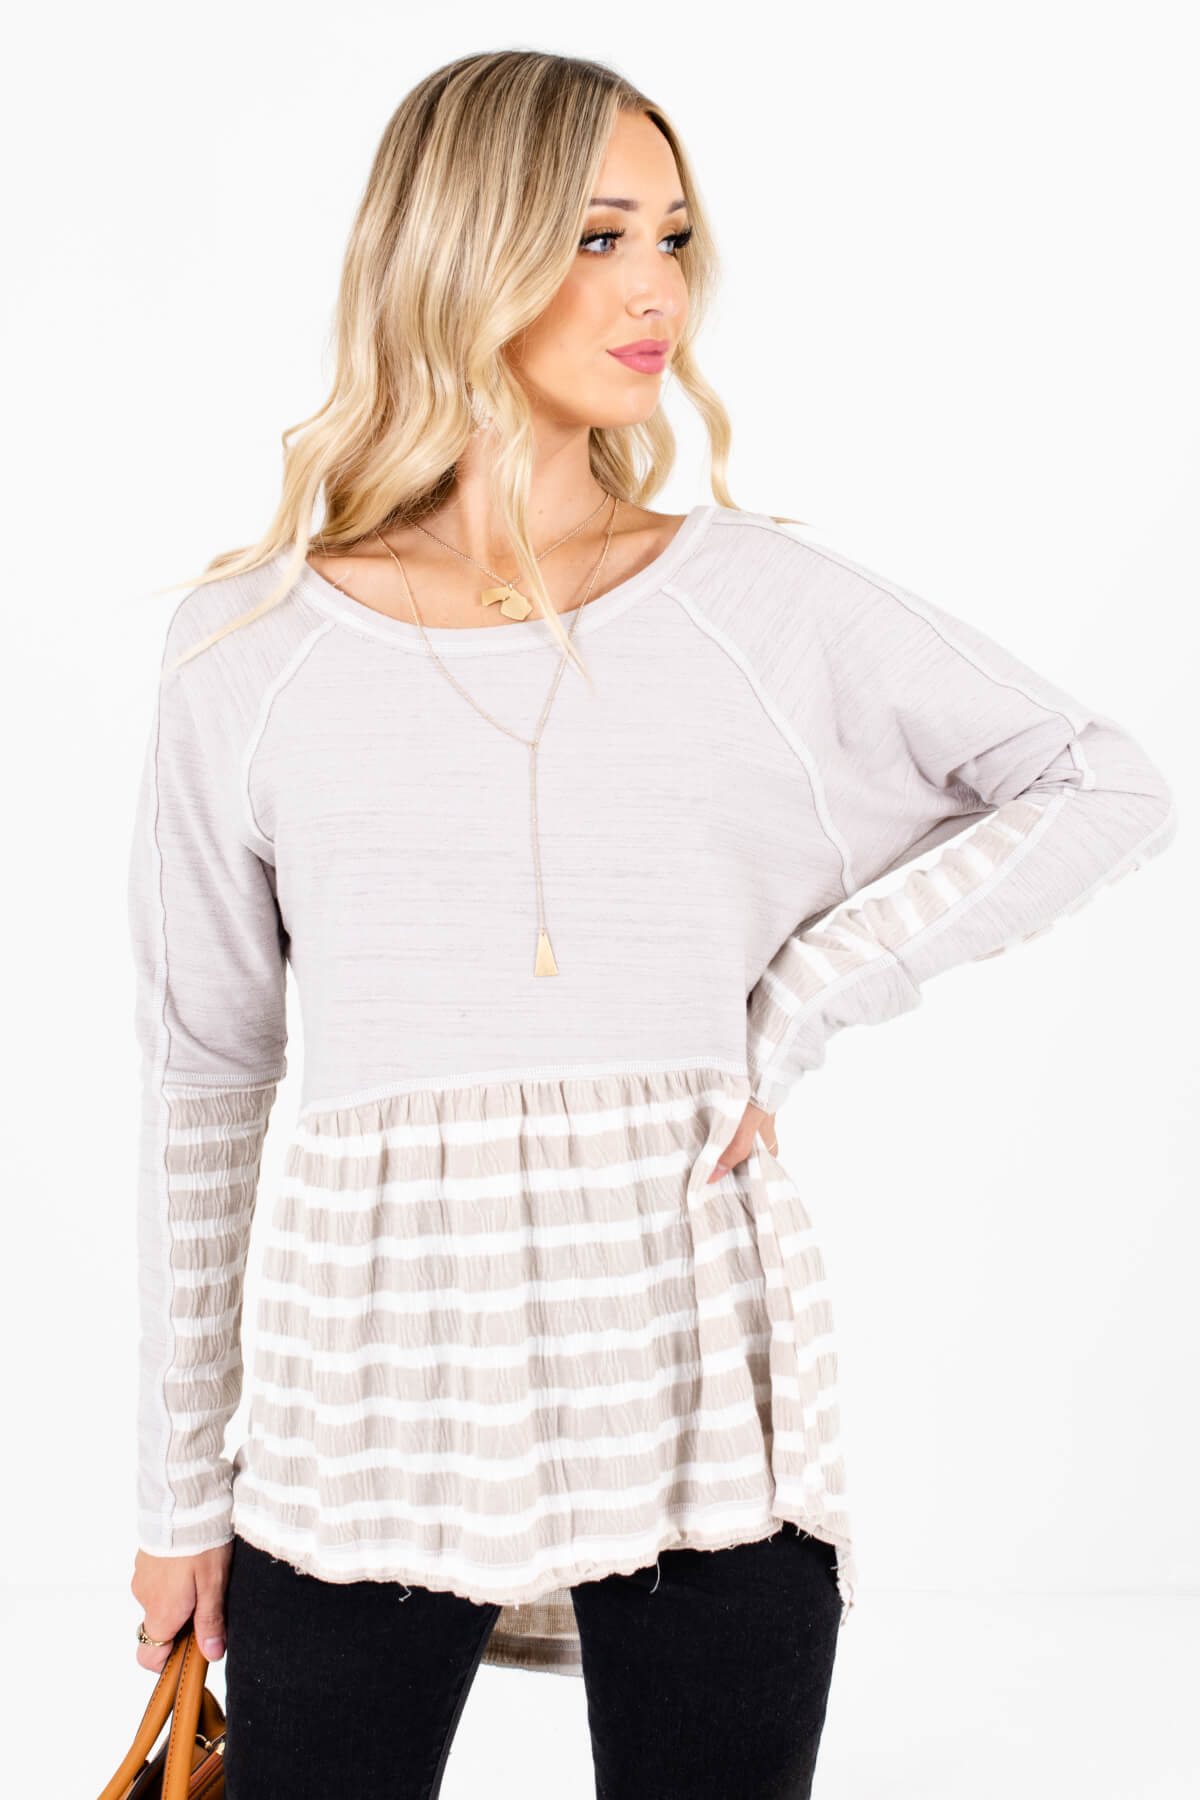 Taupe Brown and White Striped Boutique Tops for Women